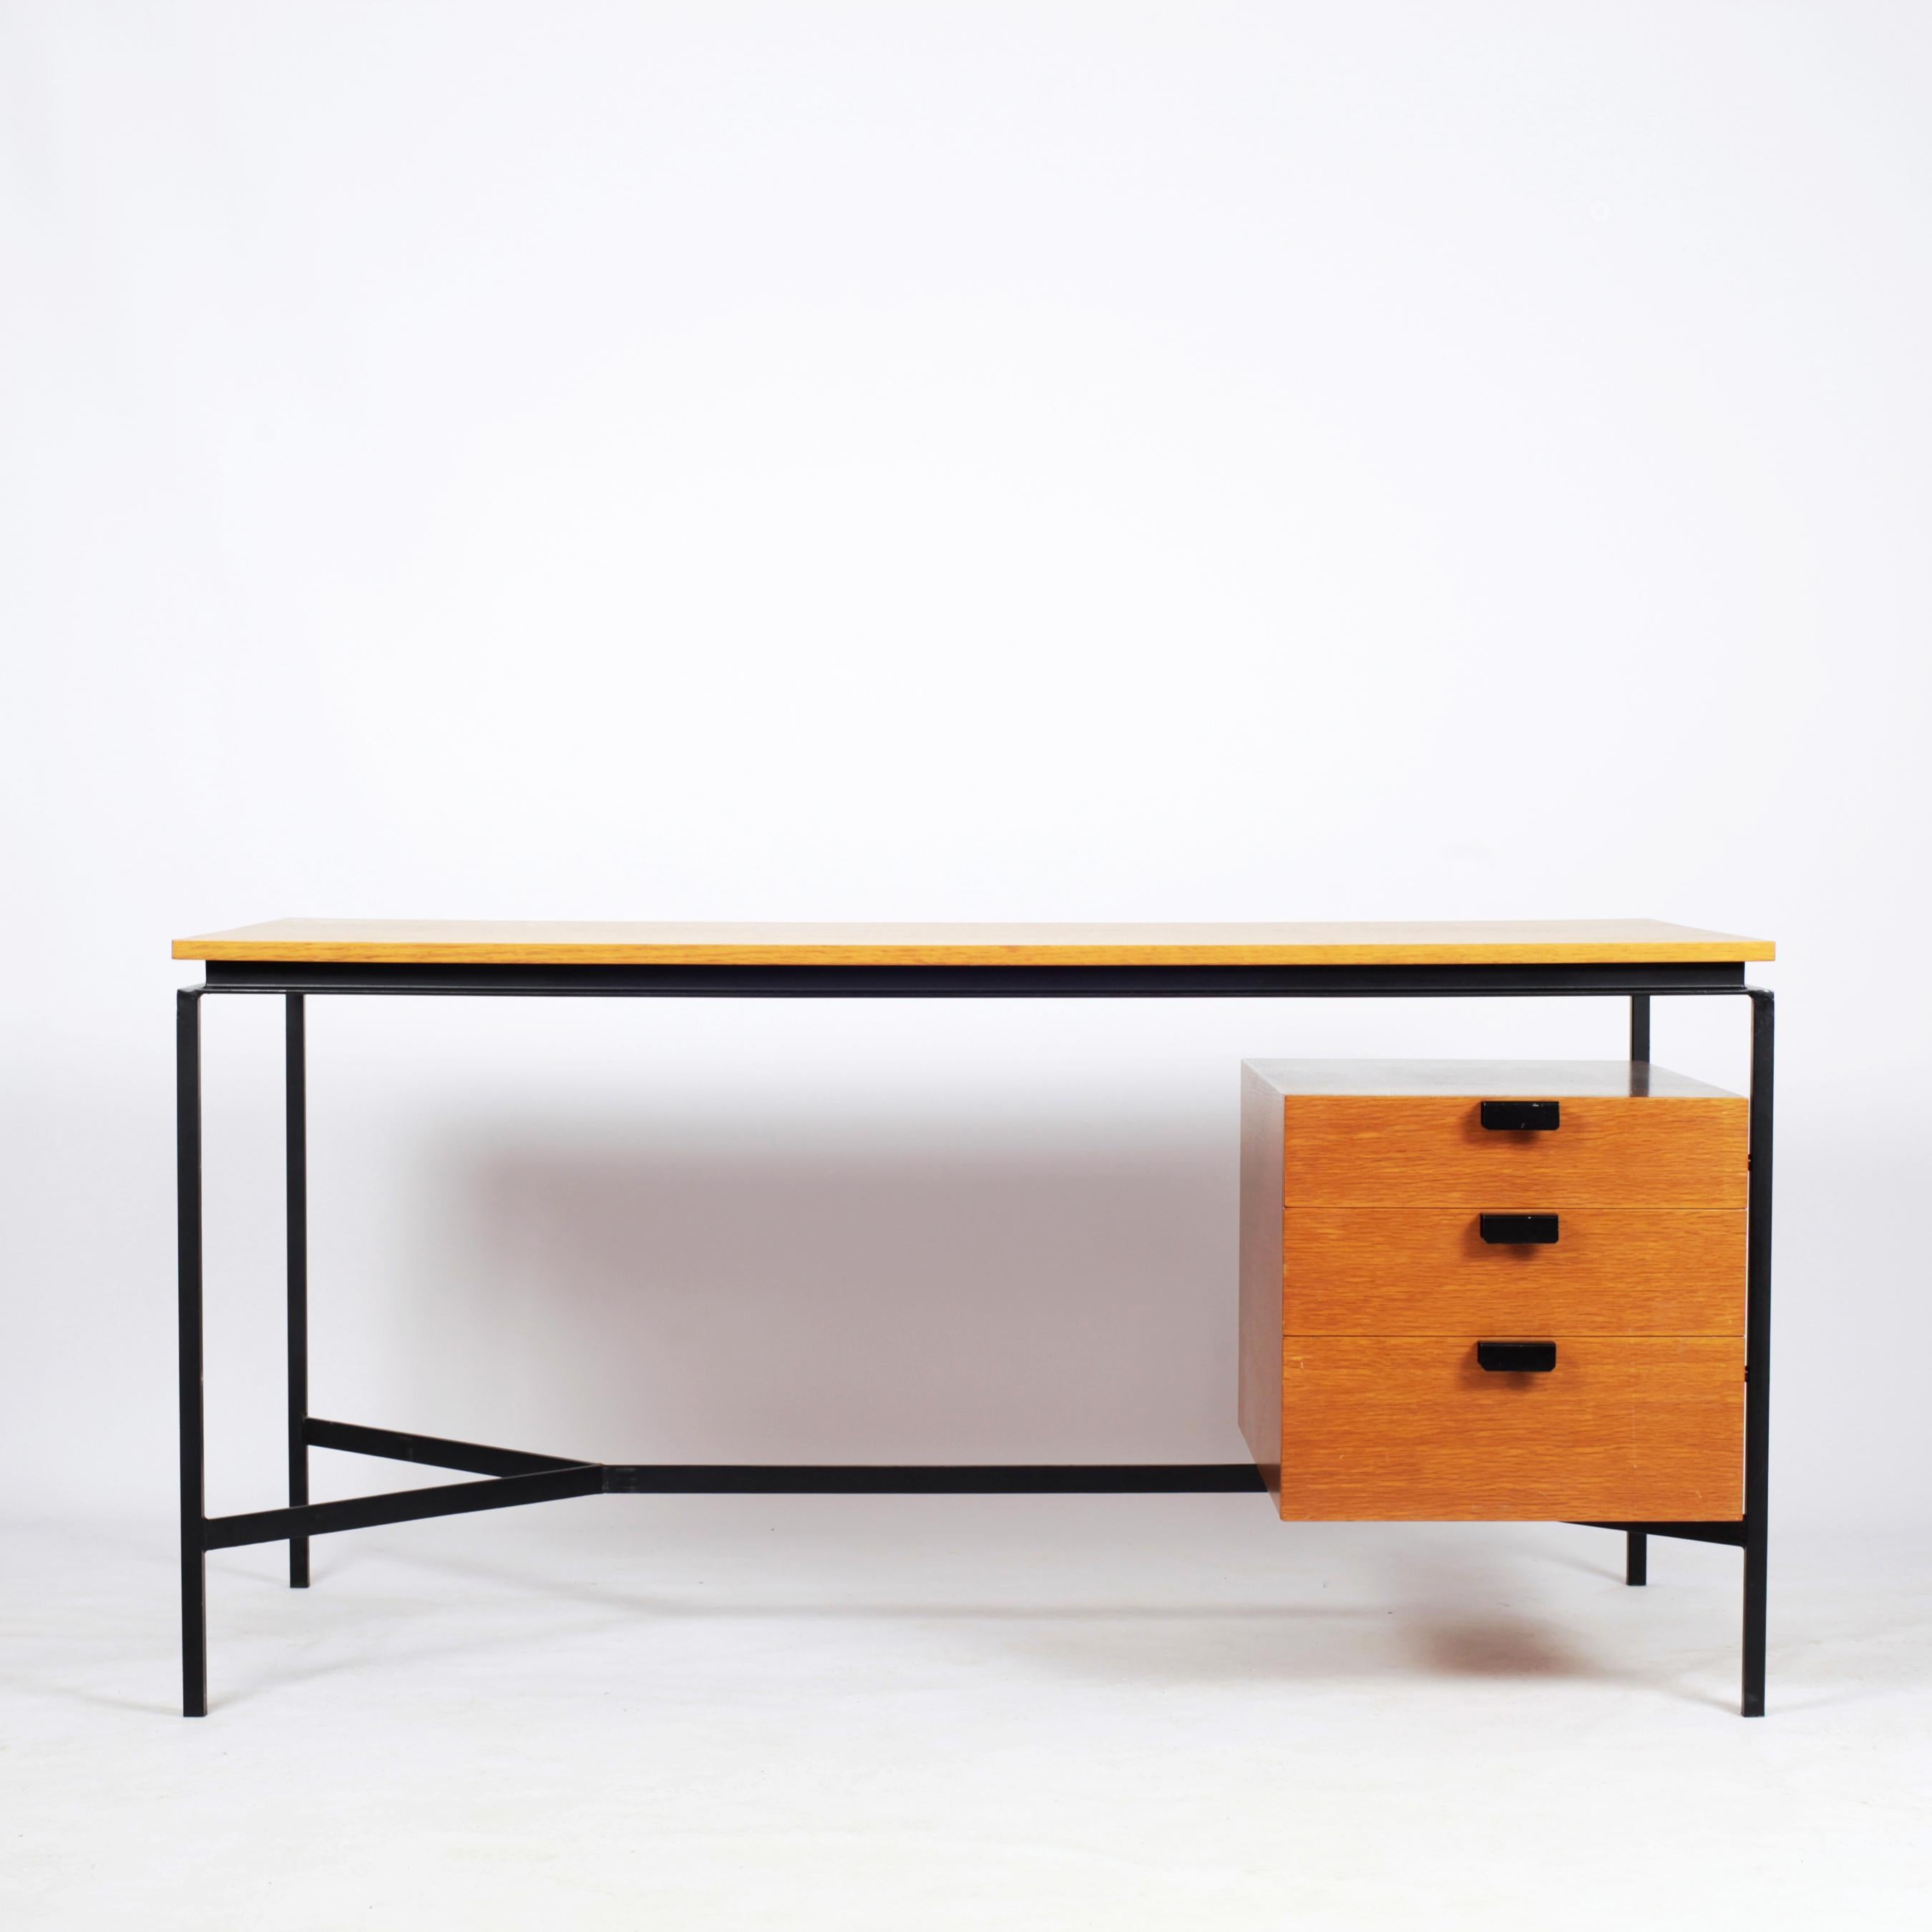 CM 172 desk designed by Pierre Paulin in 1955 for Thonet in France.
This desk comes with two veneered oakwood drawers box, one veneered oakwood top and an Y-shaped base and handles in black lacquered metal 
One box with two drawers and one box